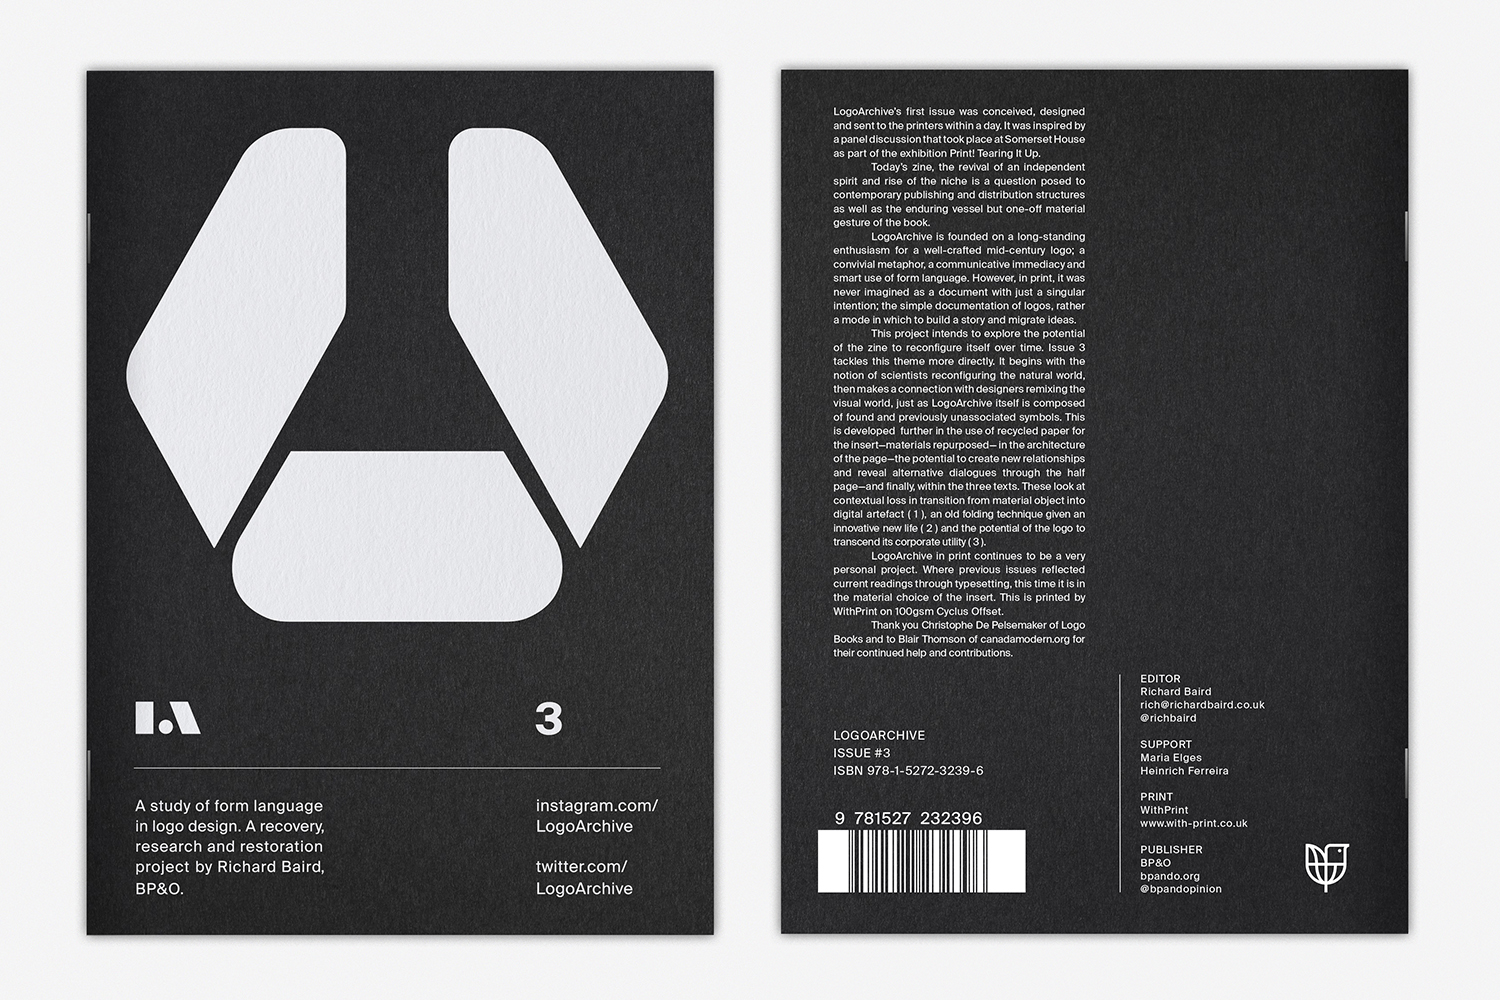 LogoArchive Issue 3 designed and edited by Richard Baird, published by BP&O